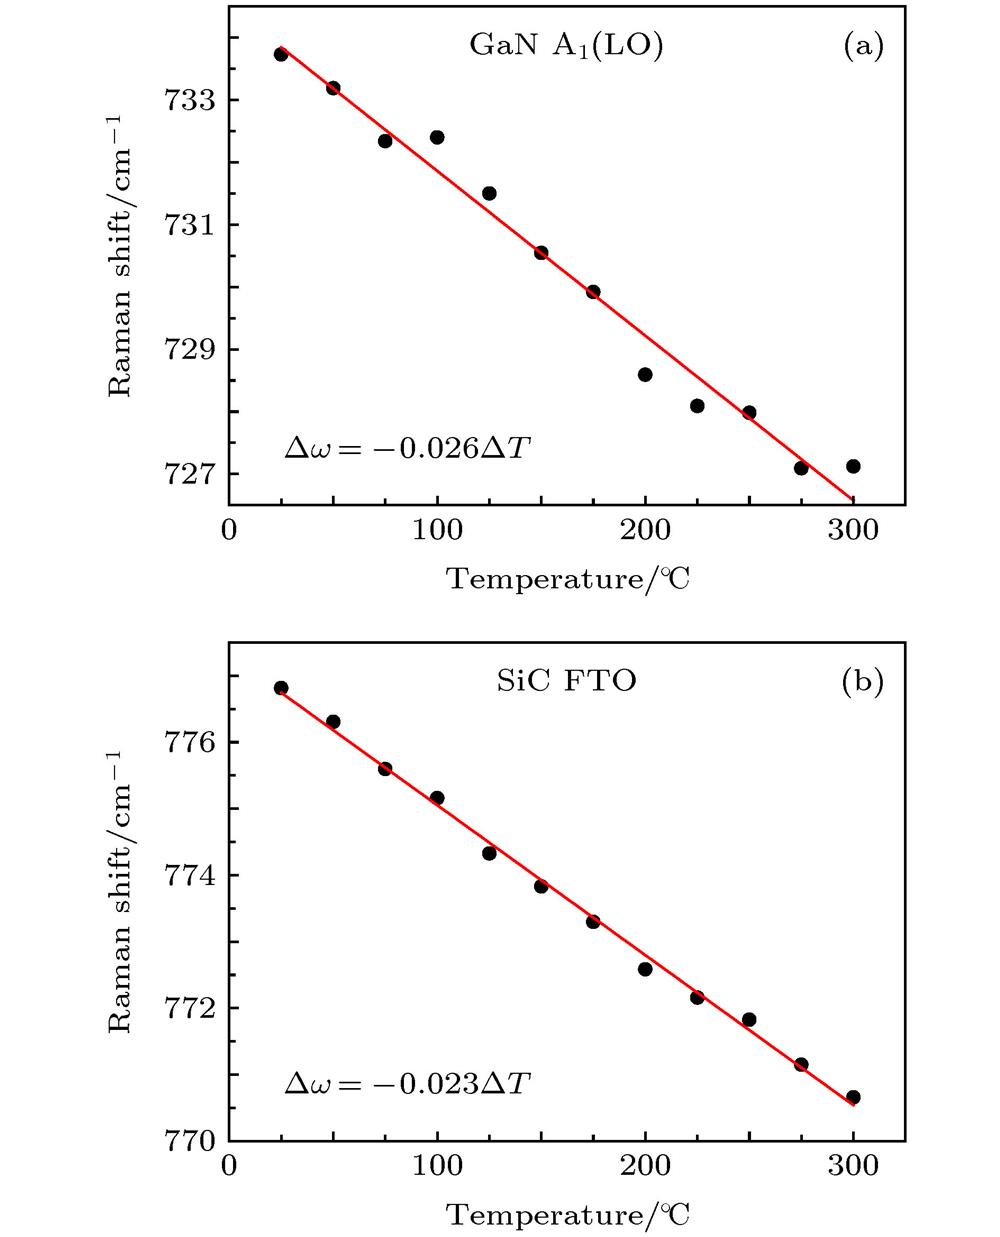 (a) Position of the GaN A1(LO) Raman peak as a function of temperature. The temperature coefficient from the linear fit is –0.026 cm–1·K–1; (b) position of the SiC FTO Raman peak as a function of temperature. The temperature coefficient from the linear fit is –0.023 cm–1·K–1.(a) GaN A1(LO)拉曼峰随温度的变化关系, 线性拟合得到的温度系数为–0.026 cm–1·K–1; (b) SiC FTO拉曼峰随温度的变化关系, 线性拟合得到的温度系数为–0.023 cm–1·K–1